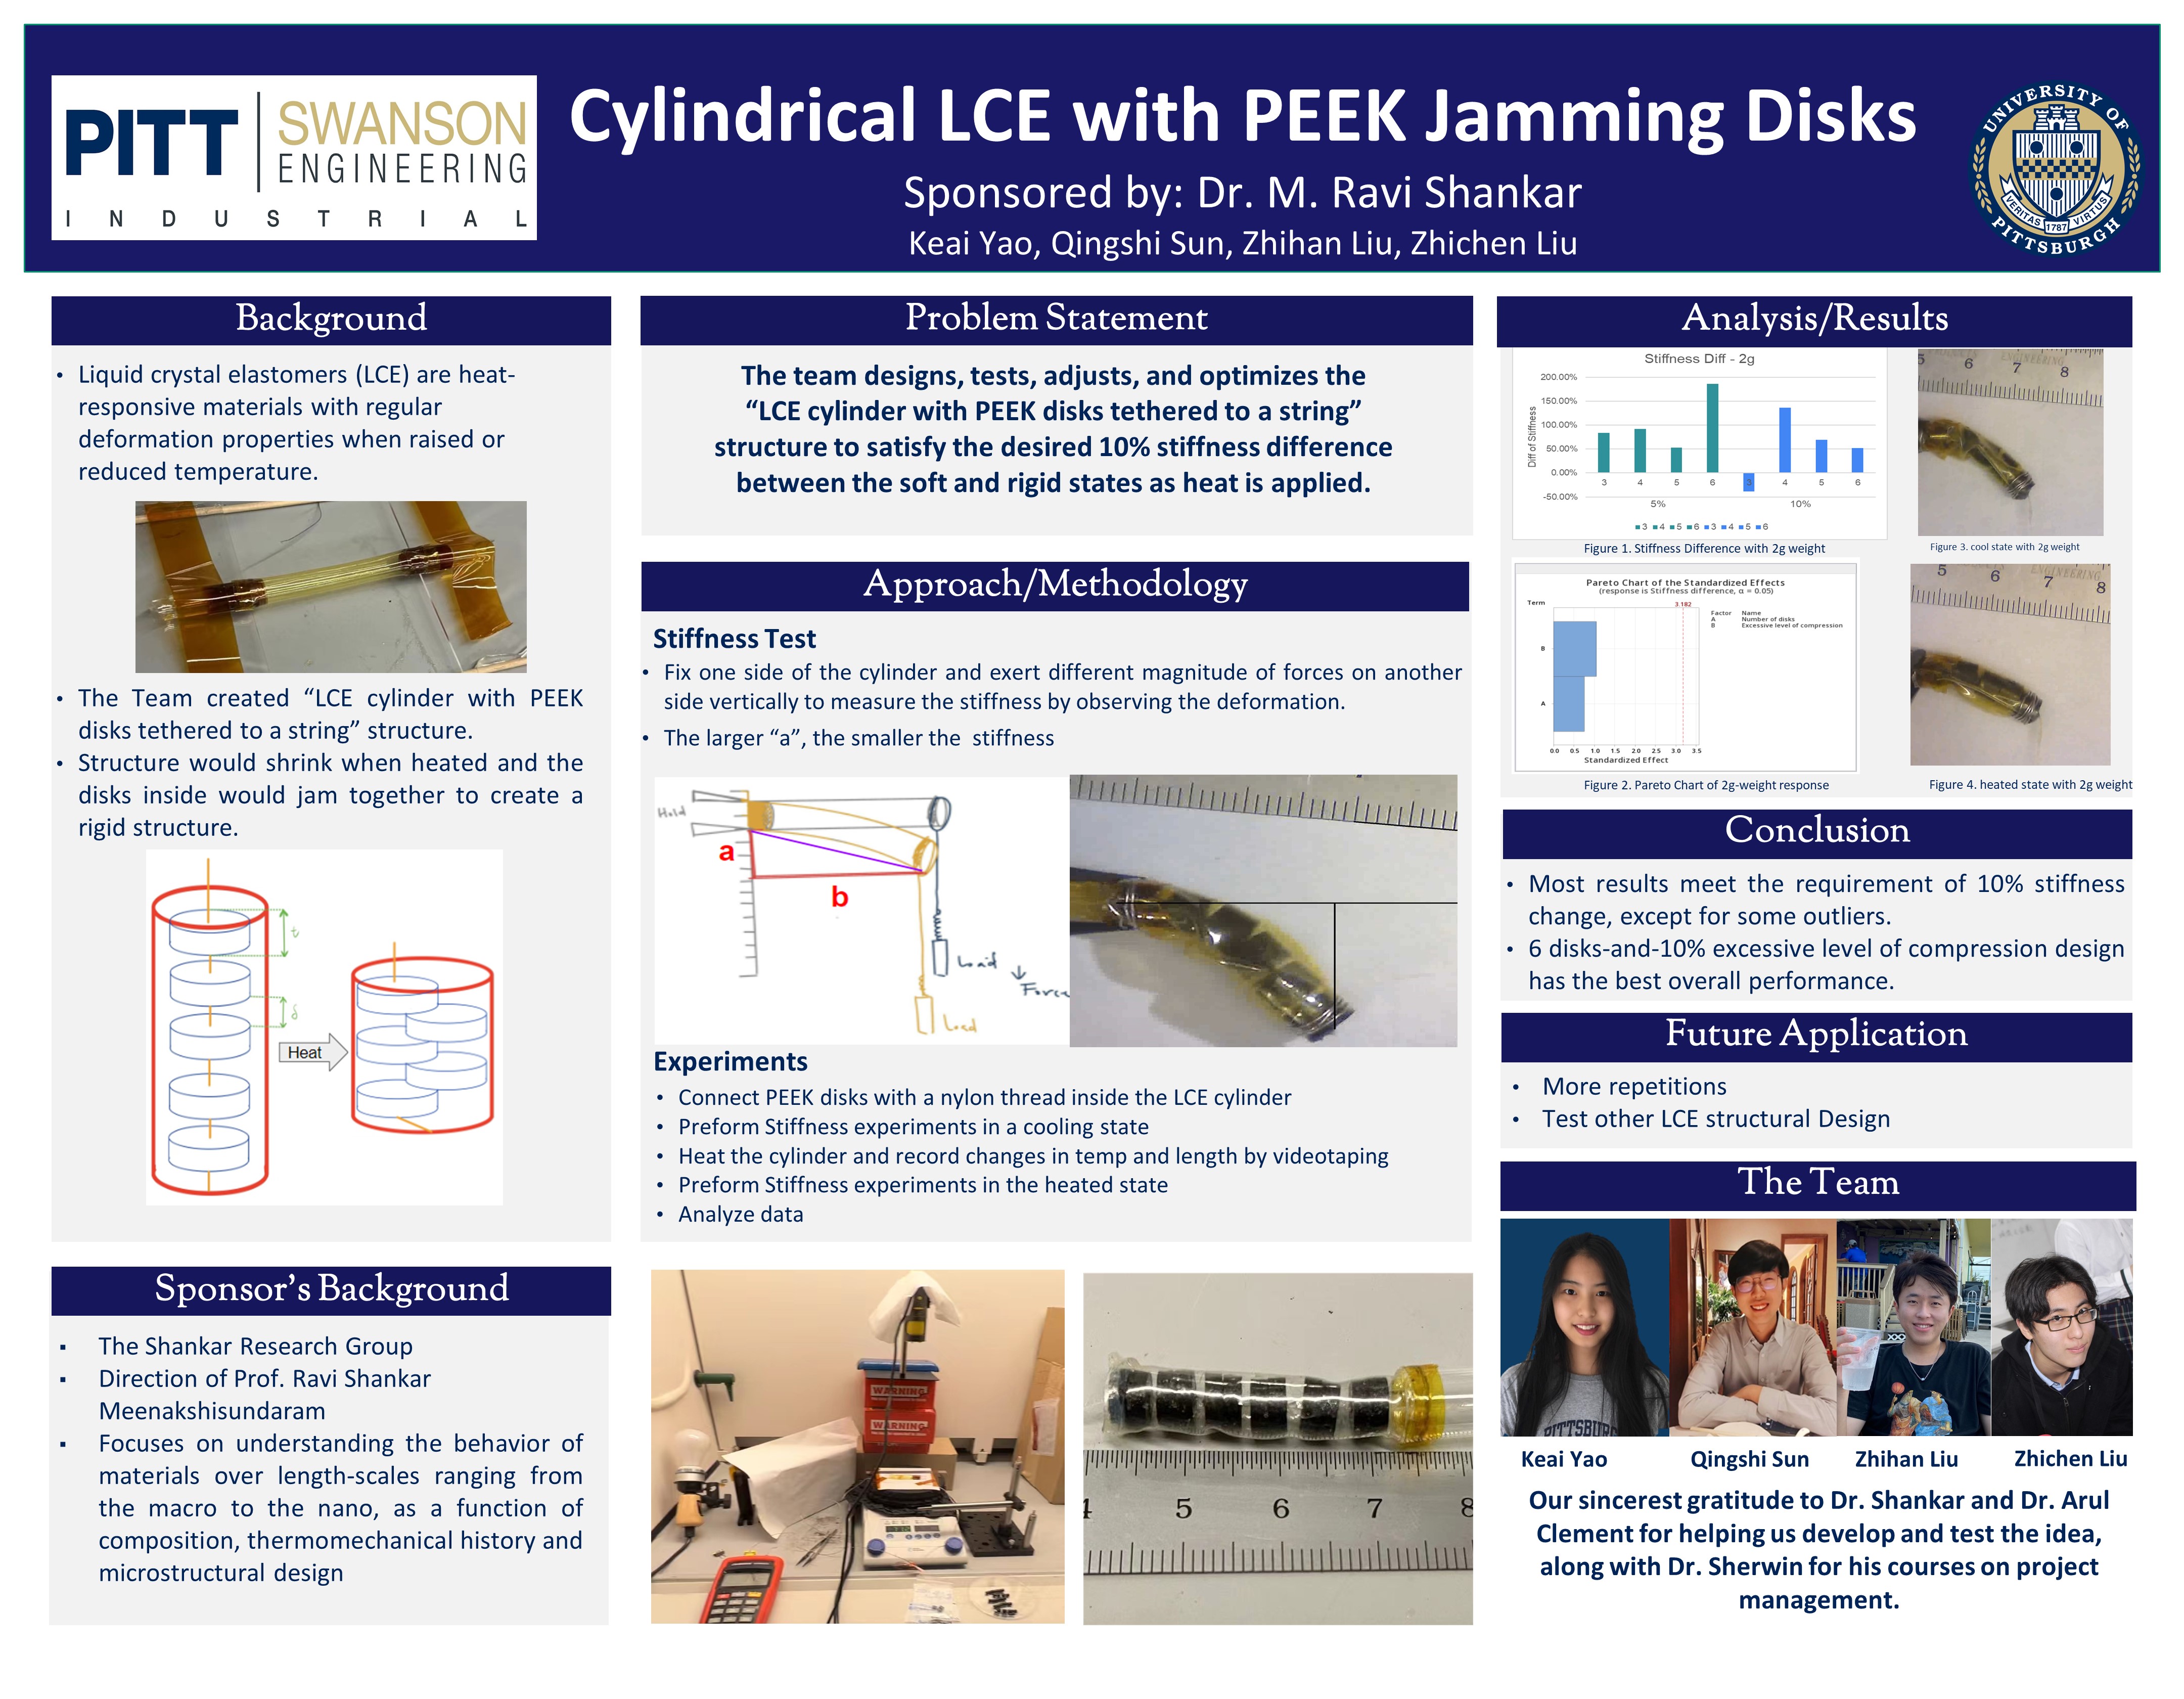 Senior Design Project - Cylindrical LCE with PEEK Jamming Disks